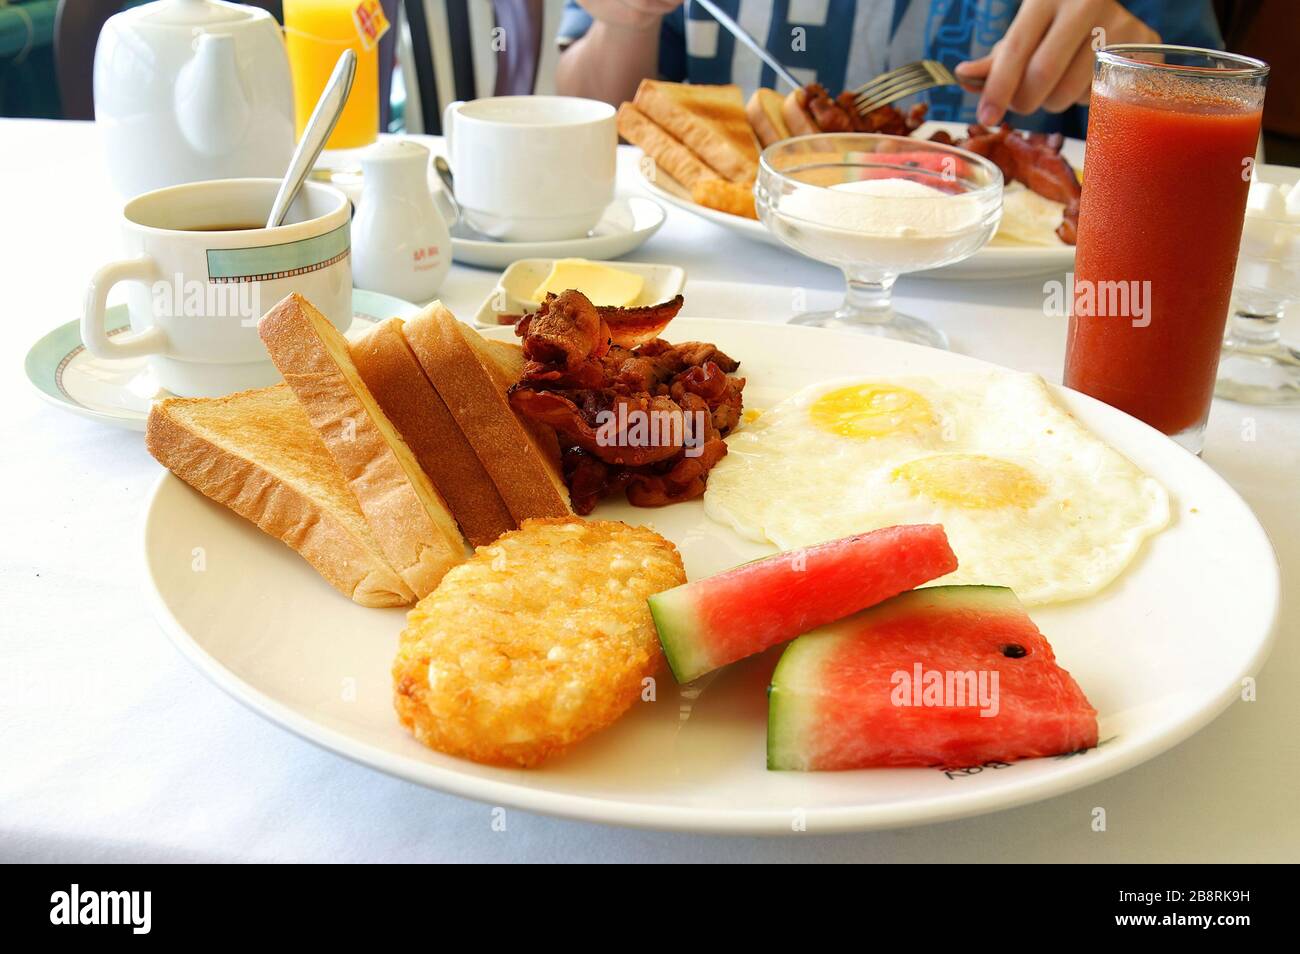 Close up shot of an American style breakfast at Palau Stock Photo